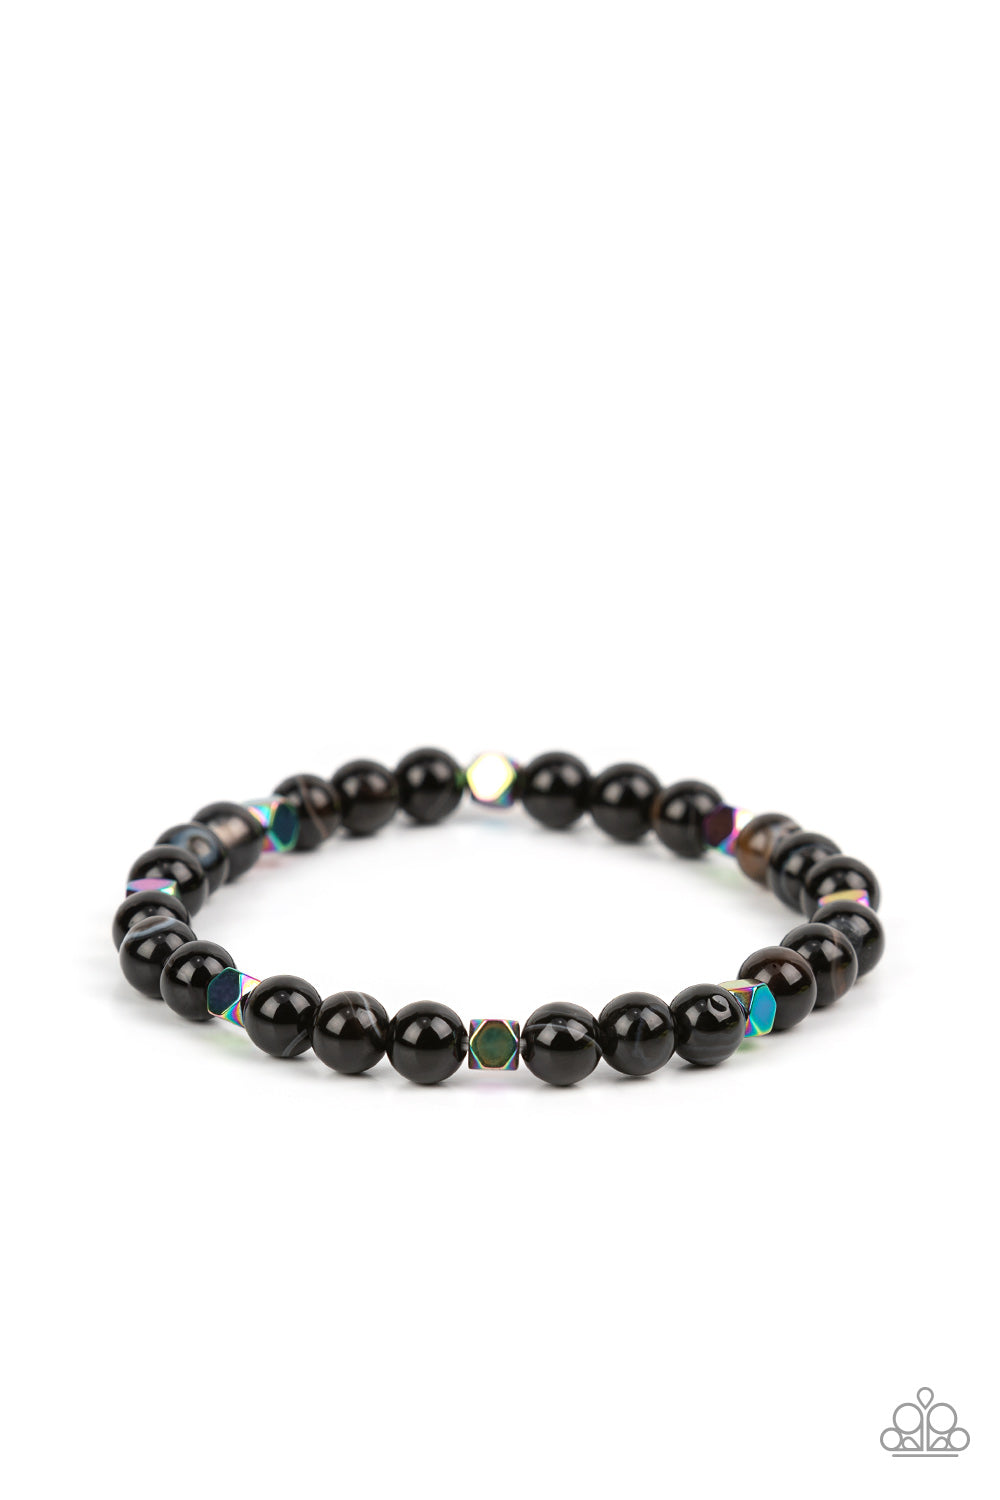 Interstellar Solitude Black Urban Bracelet - Paparazzi Accessories  A dainty collection of natural-finished black stone beads and faceted metallic oil spill cube beads are threaded along a stretchy band around the wrist for an earthy flair.  Sold as one individual bracelet.